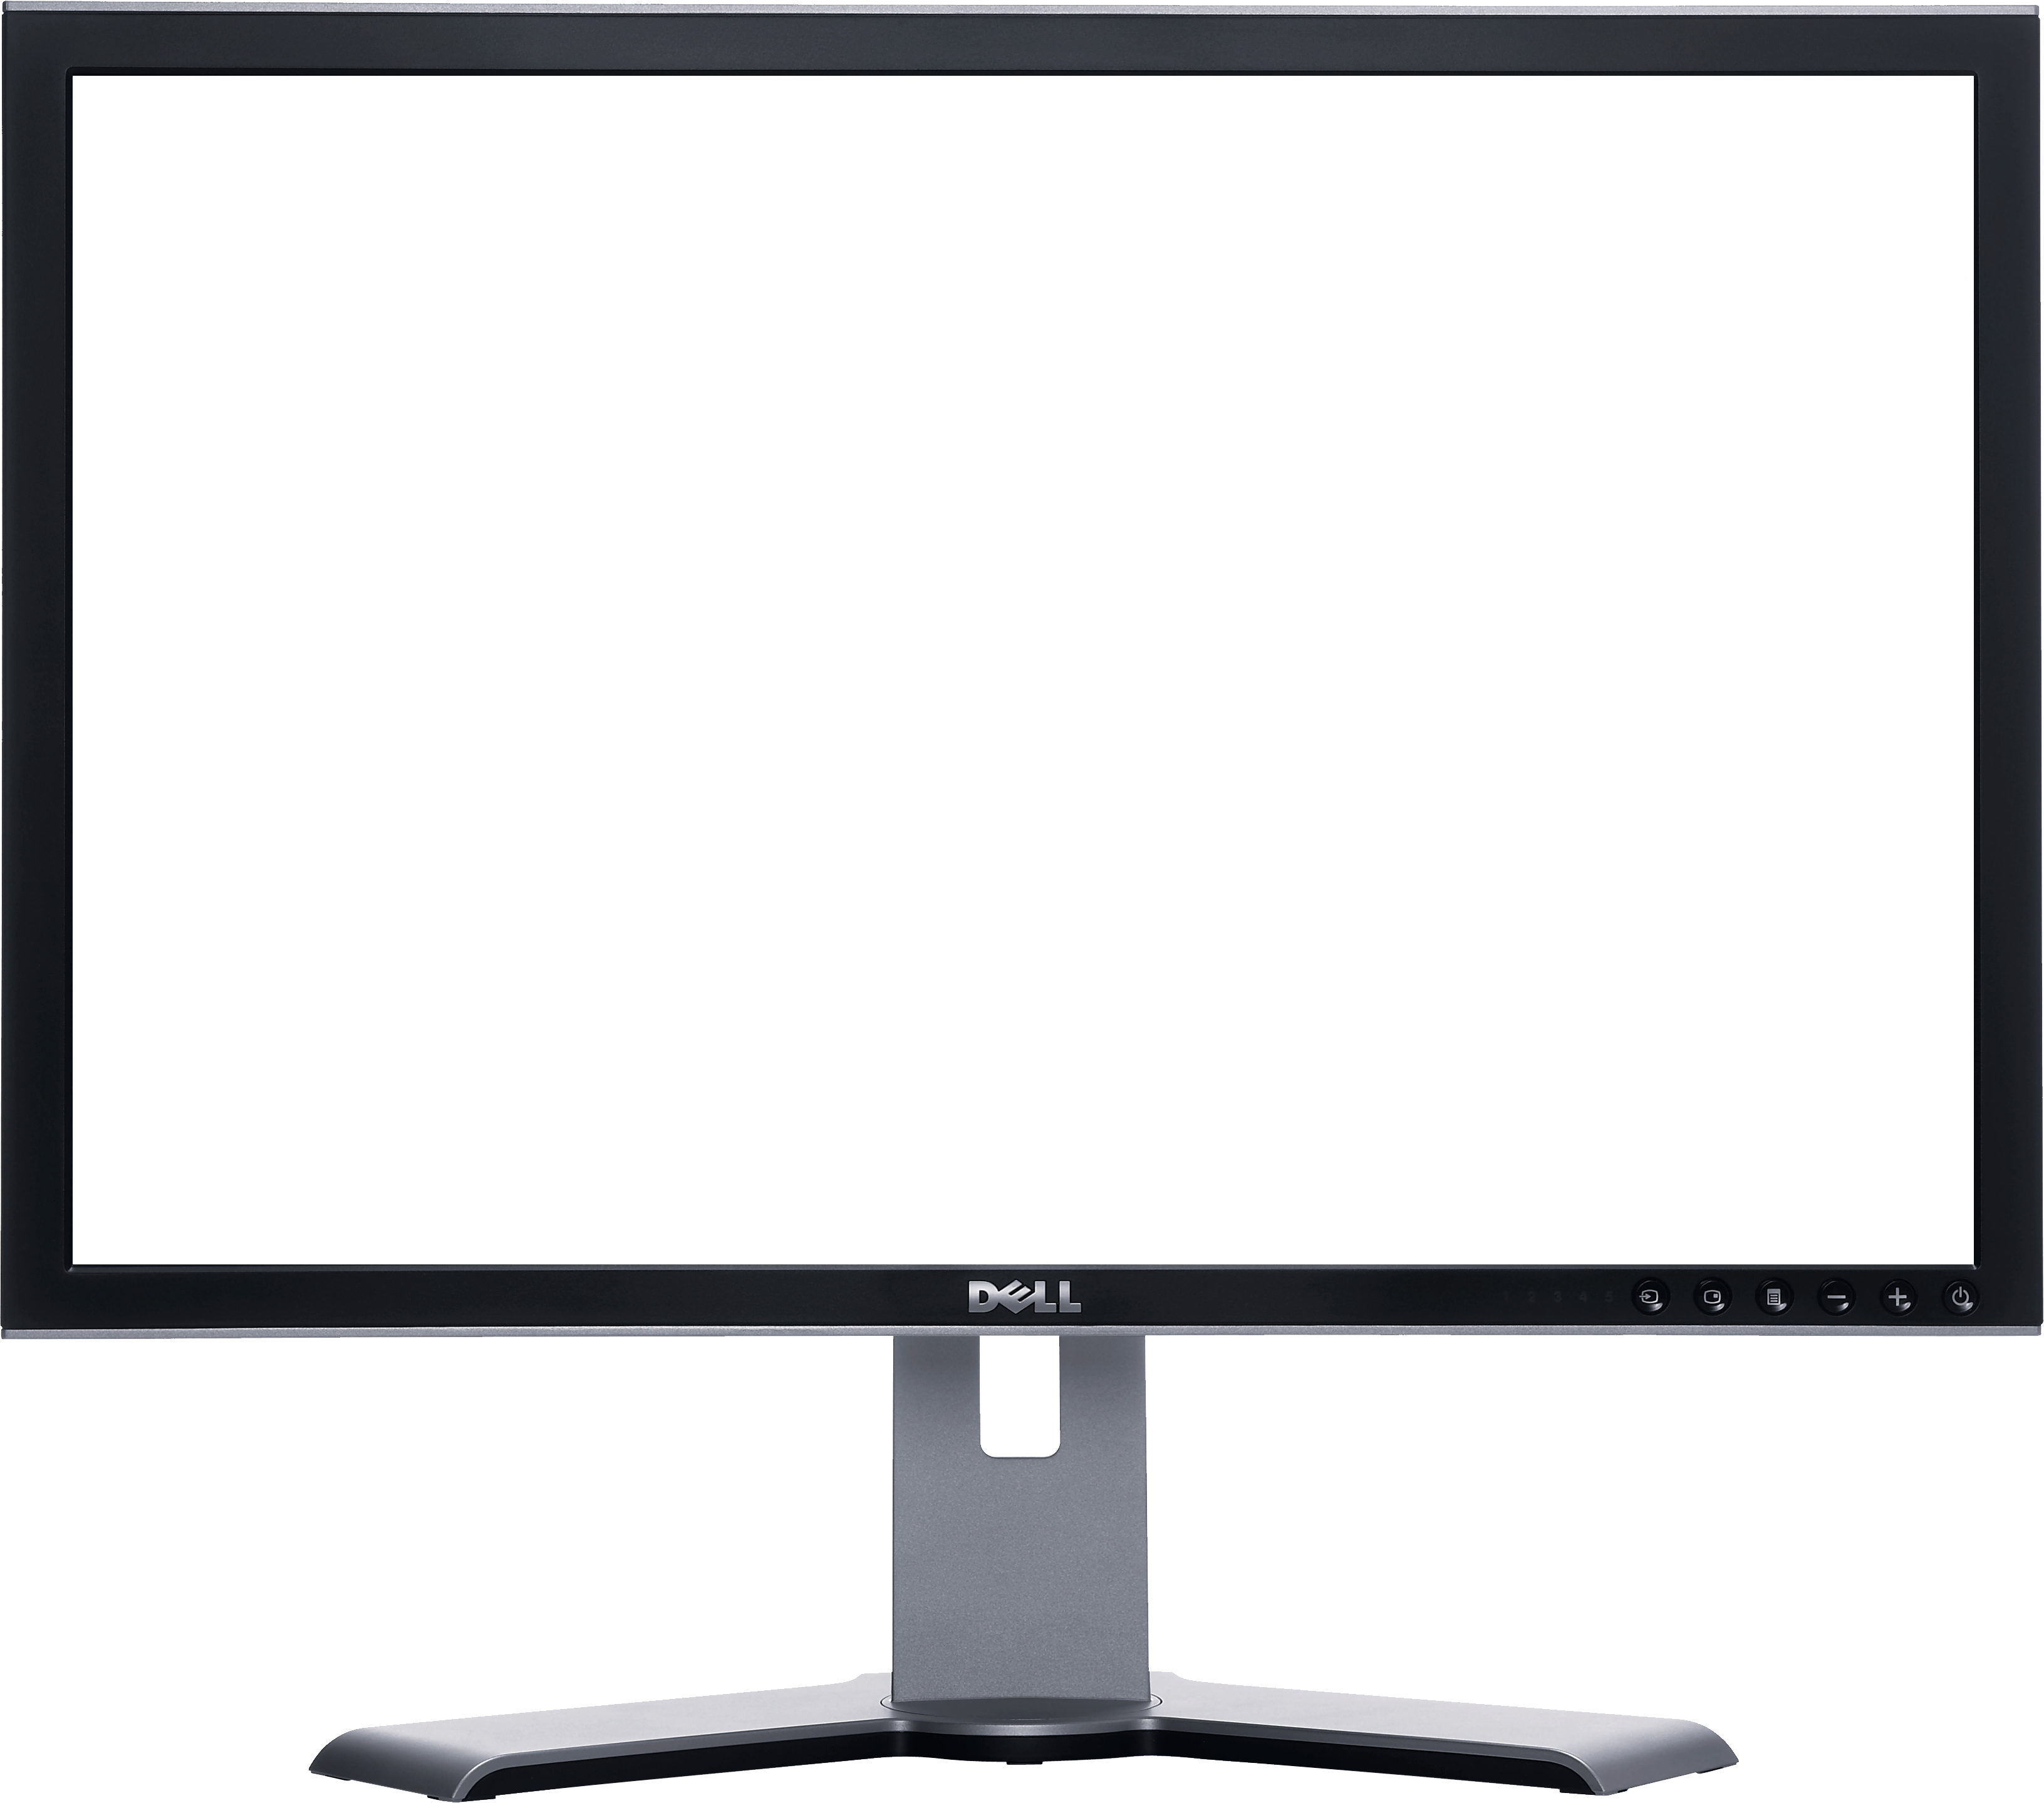 Monitor transparent LCD PNG .